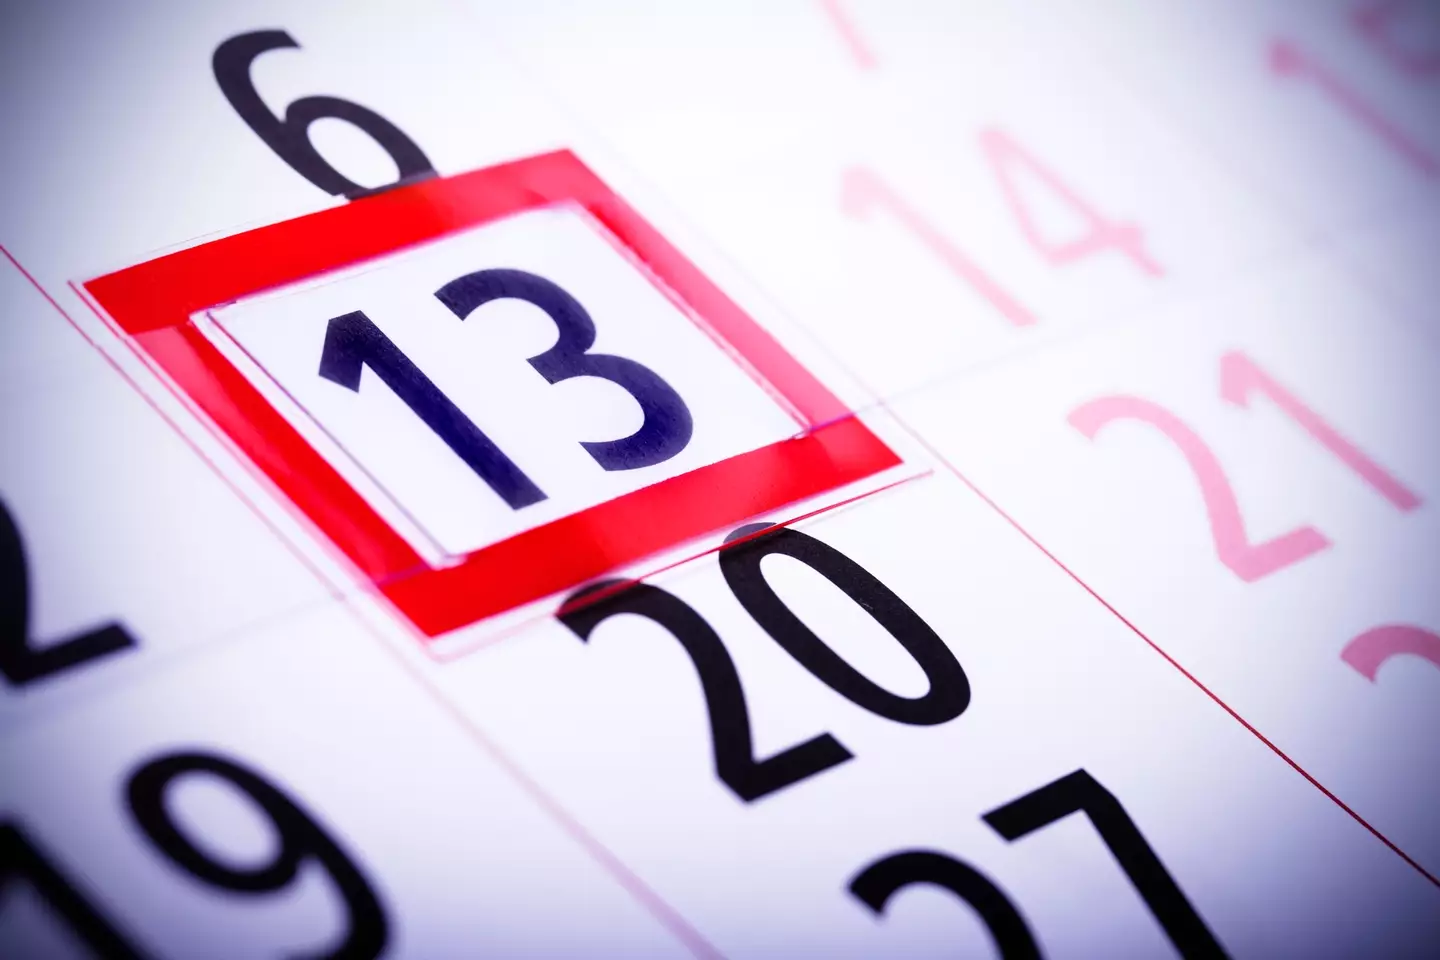 There are a range of theories about why the date is deemed to be so unlucky.